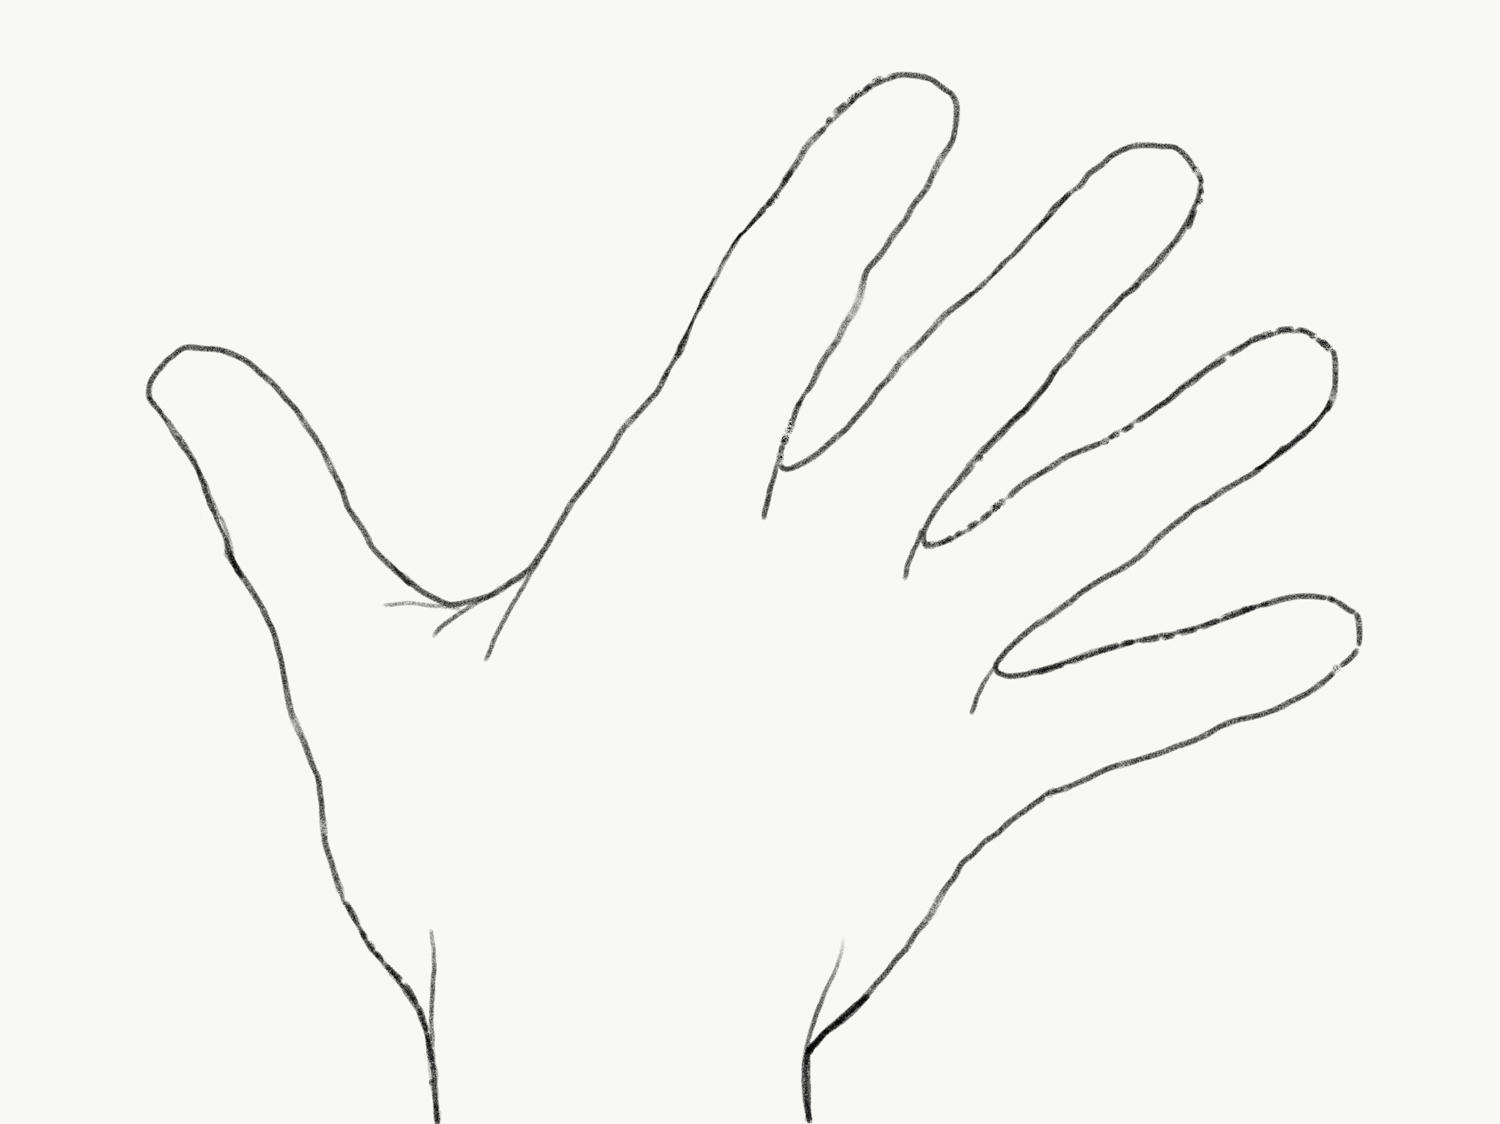 The outline of a hand traced in Photoshop Sketch